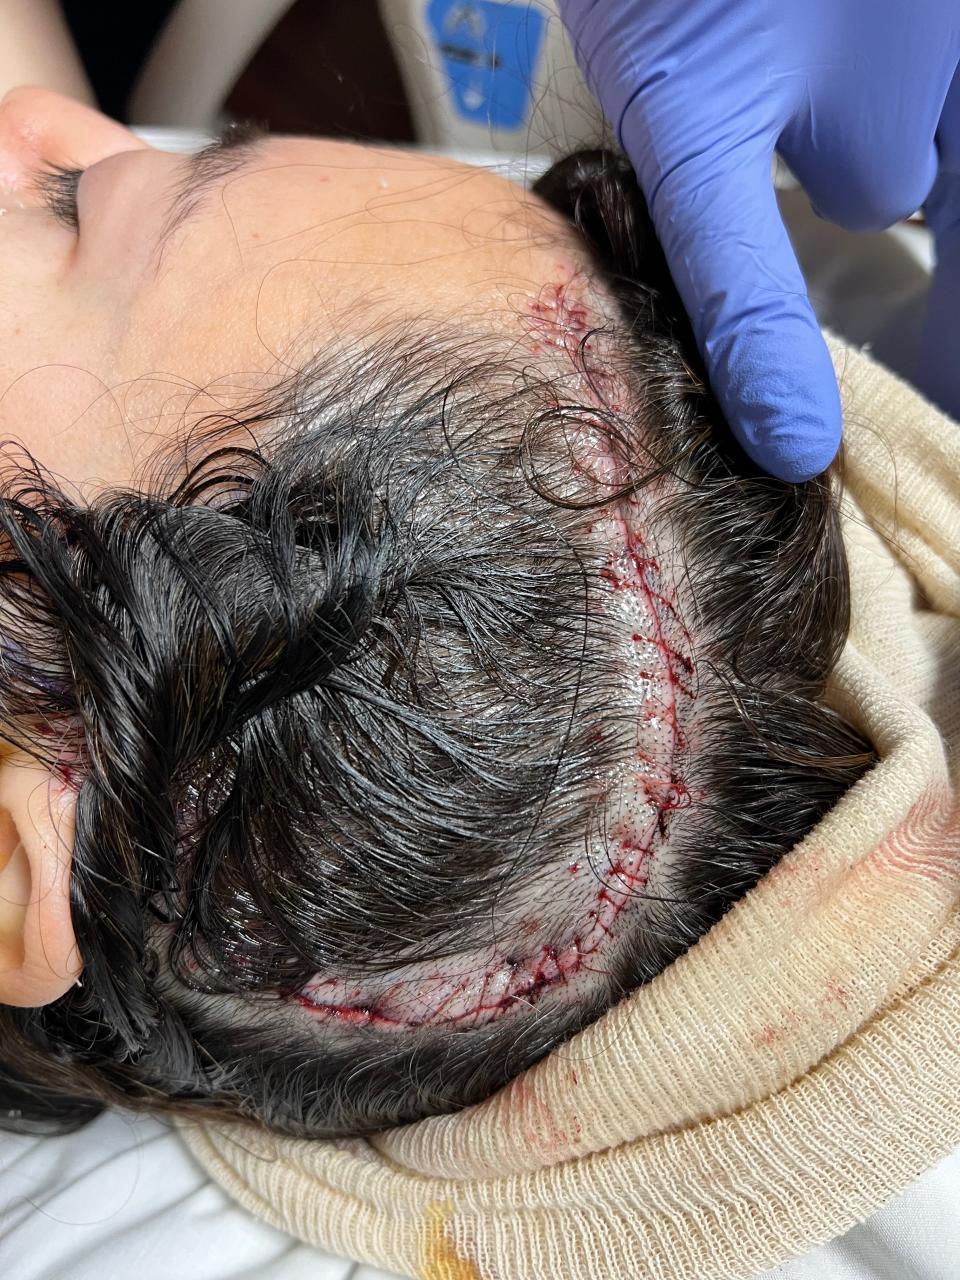 Lucy Garcia's scar from her brain tumor removal was bigger than she expected, but now, she says, her hair covers it nicely.